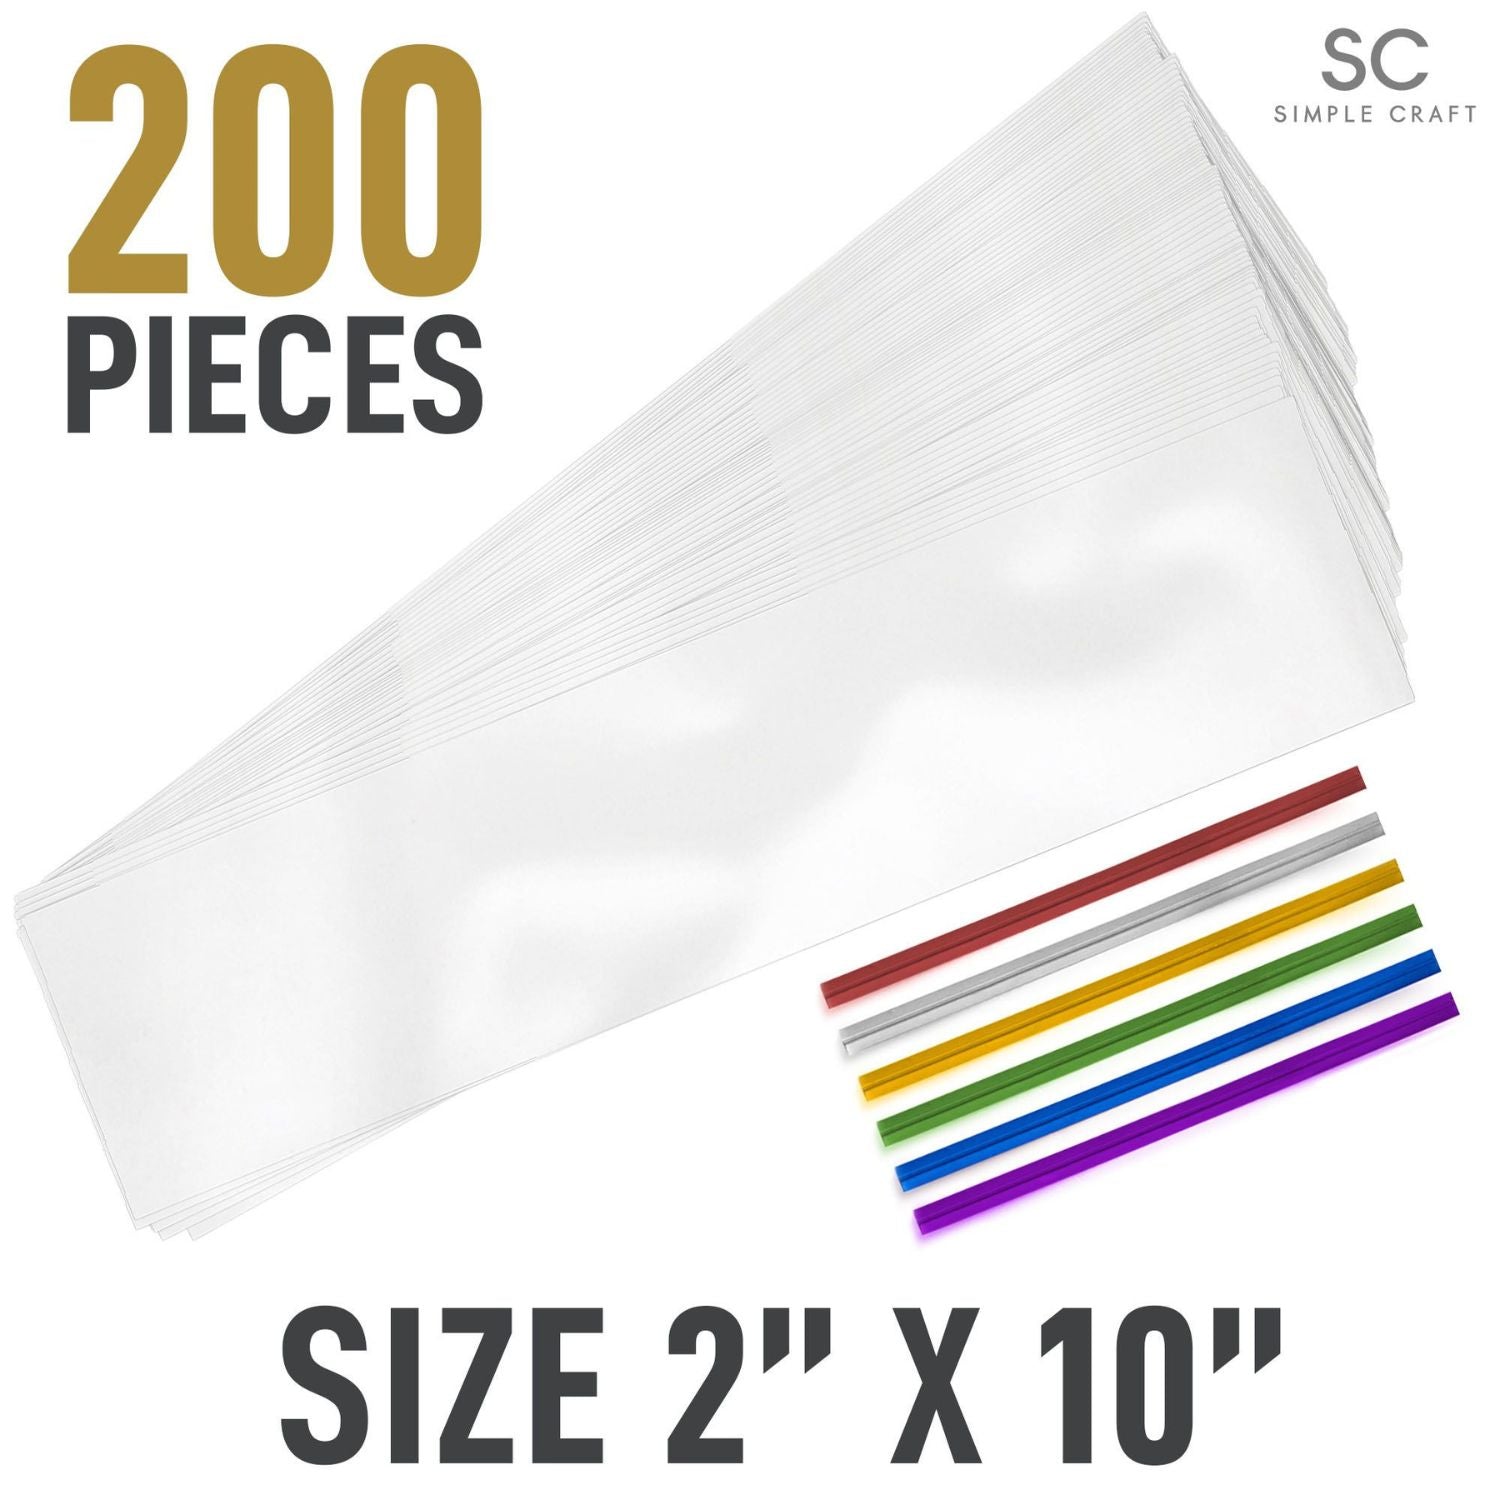 200 pieces Candy Treat Cellophane Bags